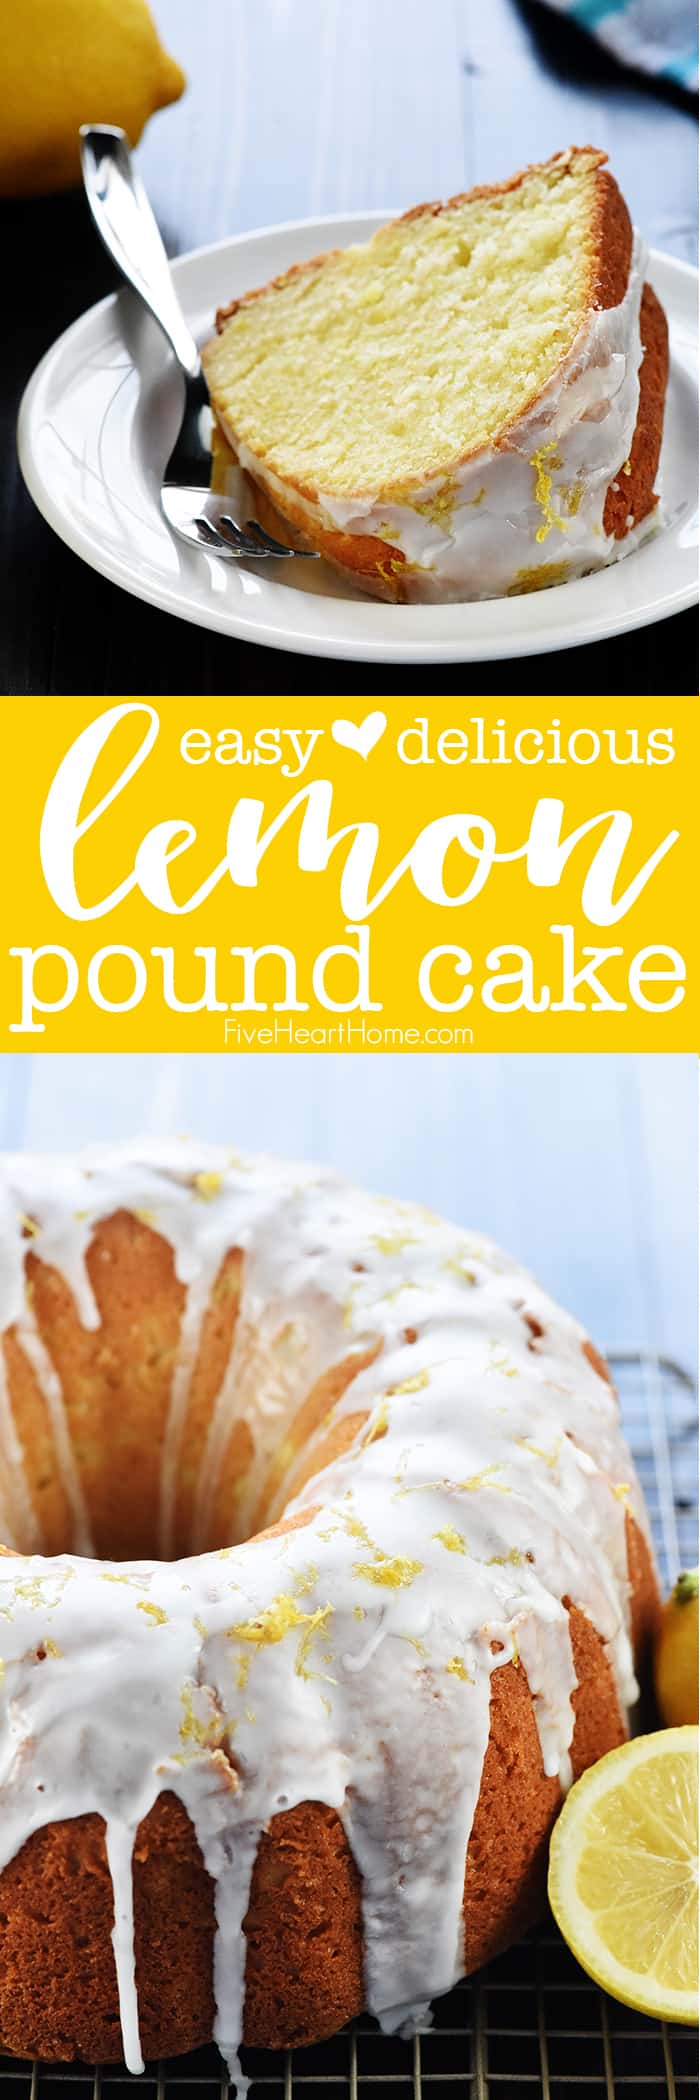 Lemon Pound Cake ~ this soft and moist lemon cake has a golden exterior and a tangy lemon glaze. It’s an easy, scrumptious Easter dessert but also perfect all spring and summer long! | FiveHeartHome.com via @fivehearthome